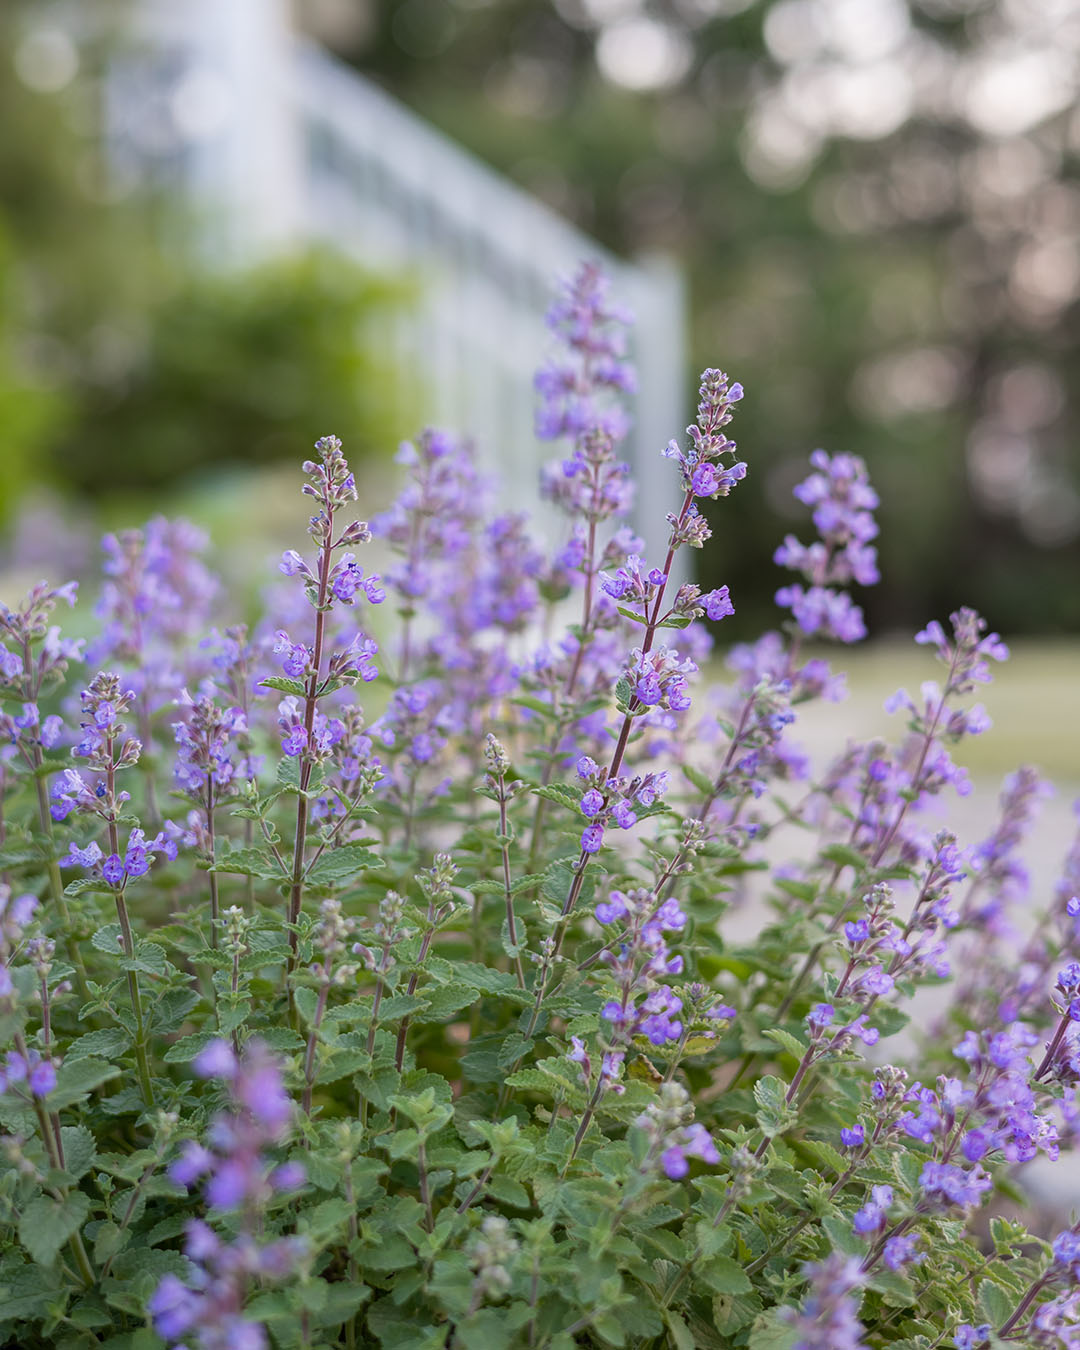 Close up view of catmint in bloom in the spring garden.